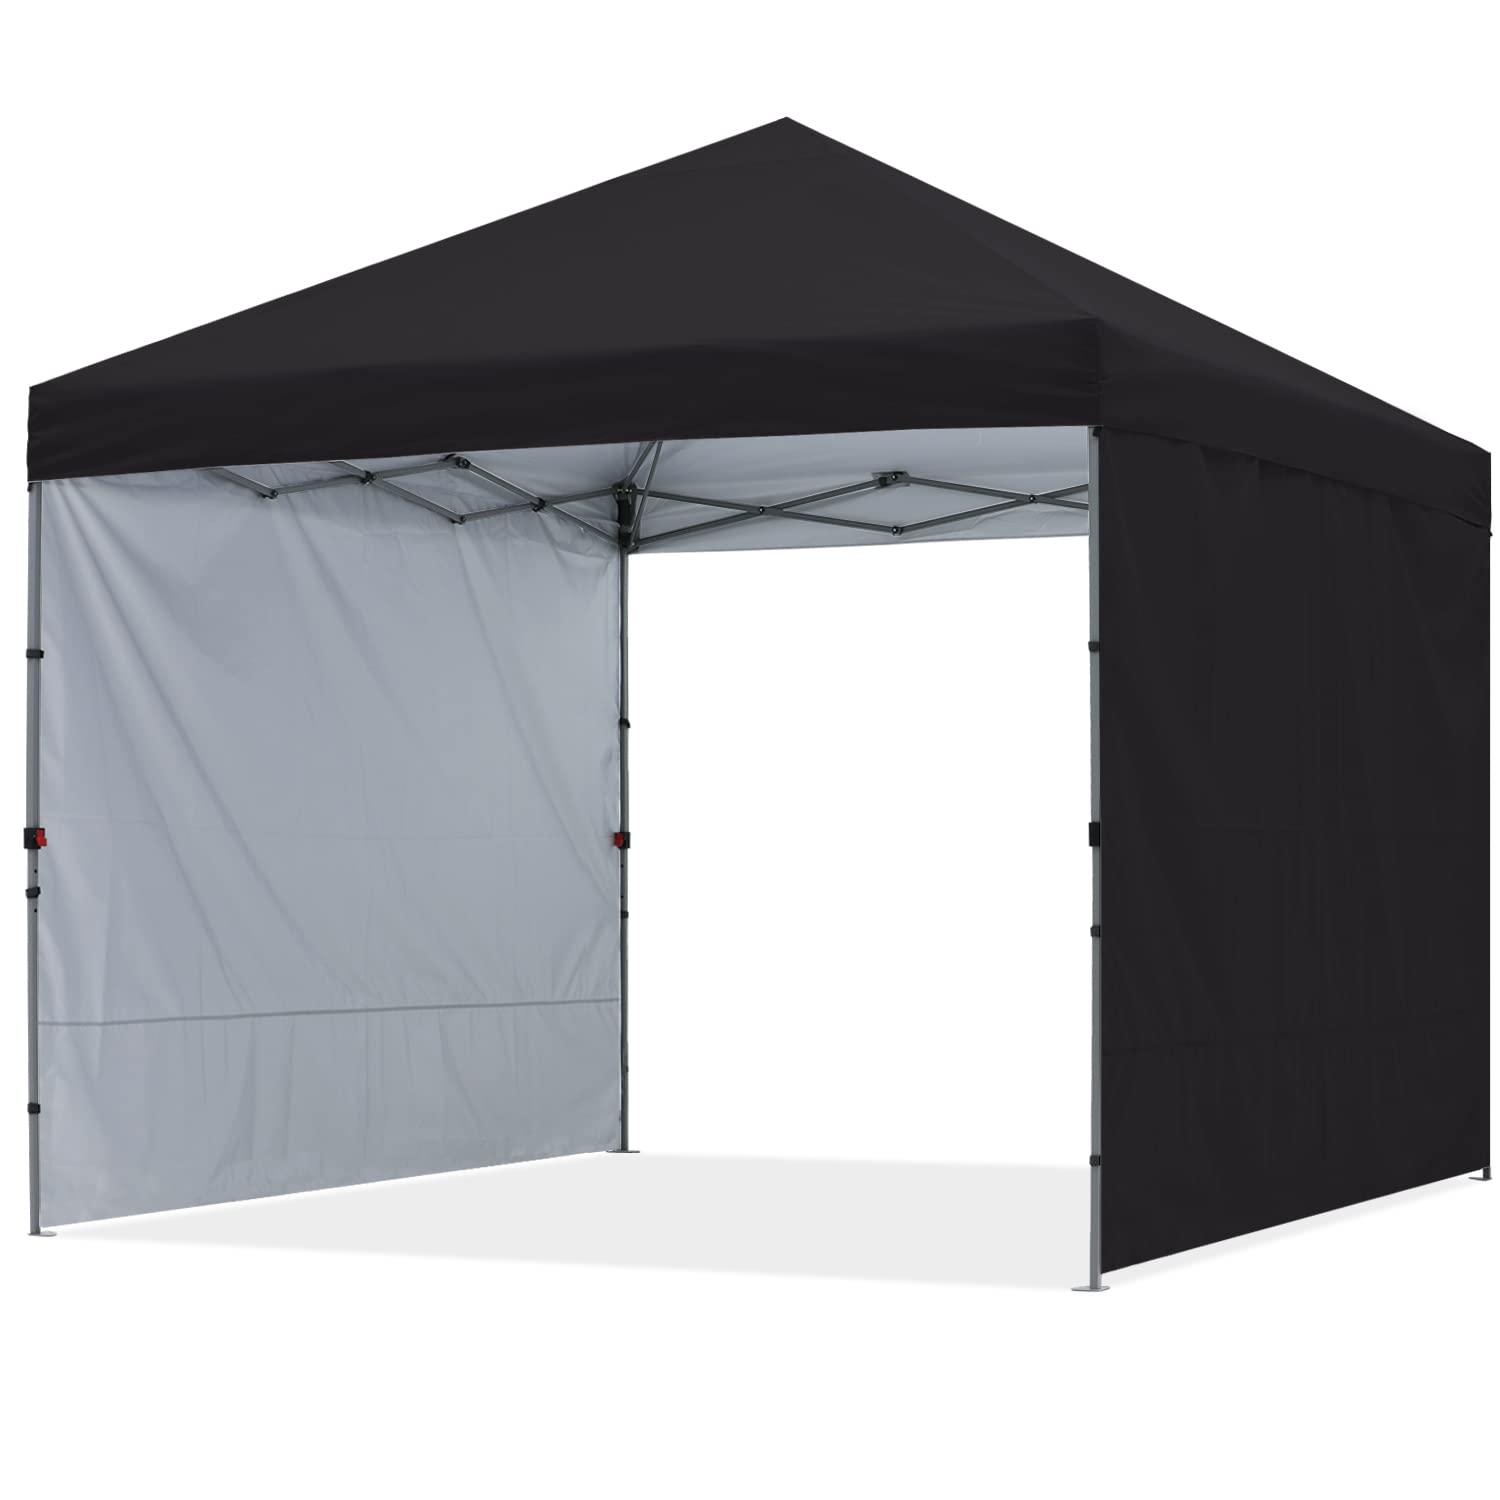 Abccanopy Outdoor Easy Pop Up Canopy Tent With 2 Sun Wall 10X10, Black